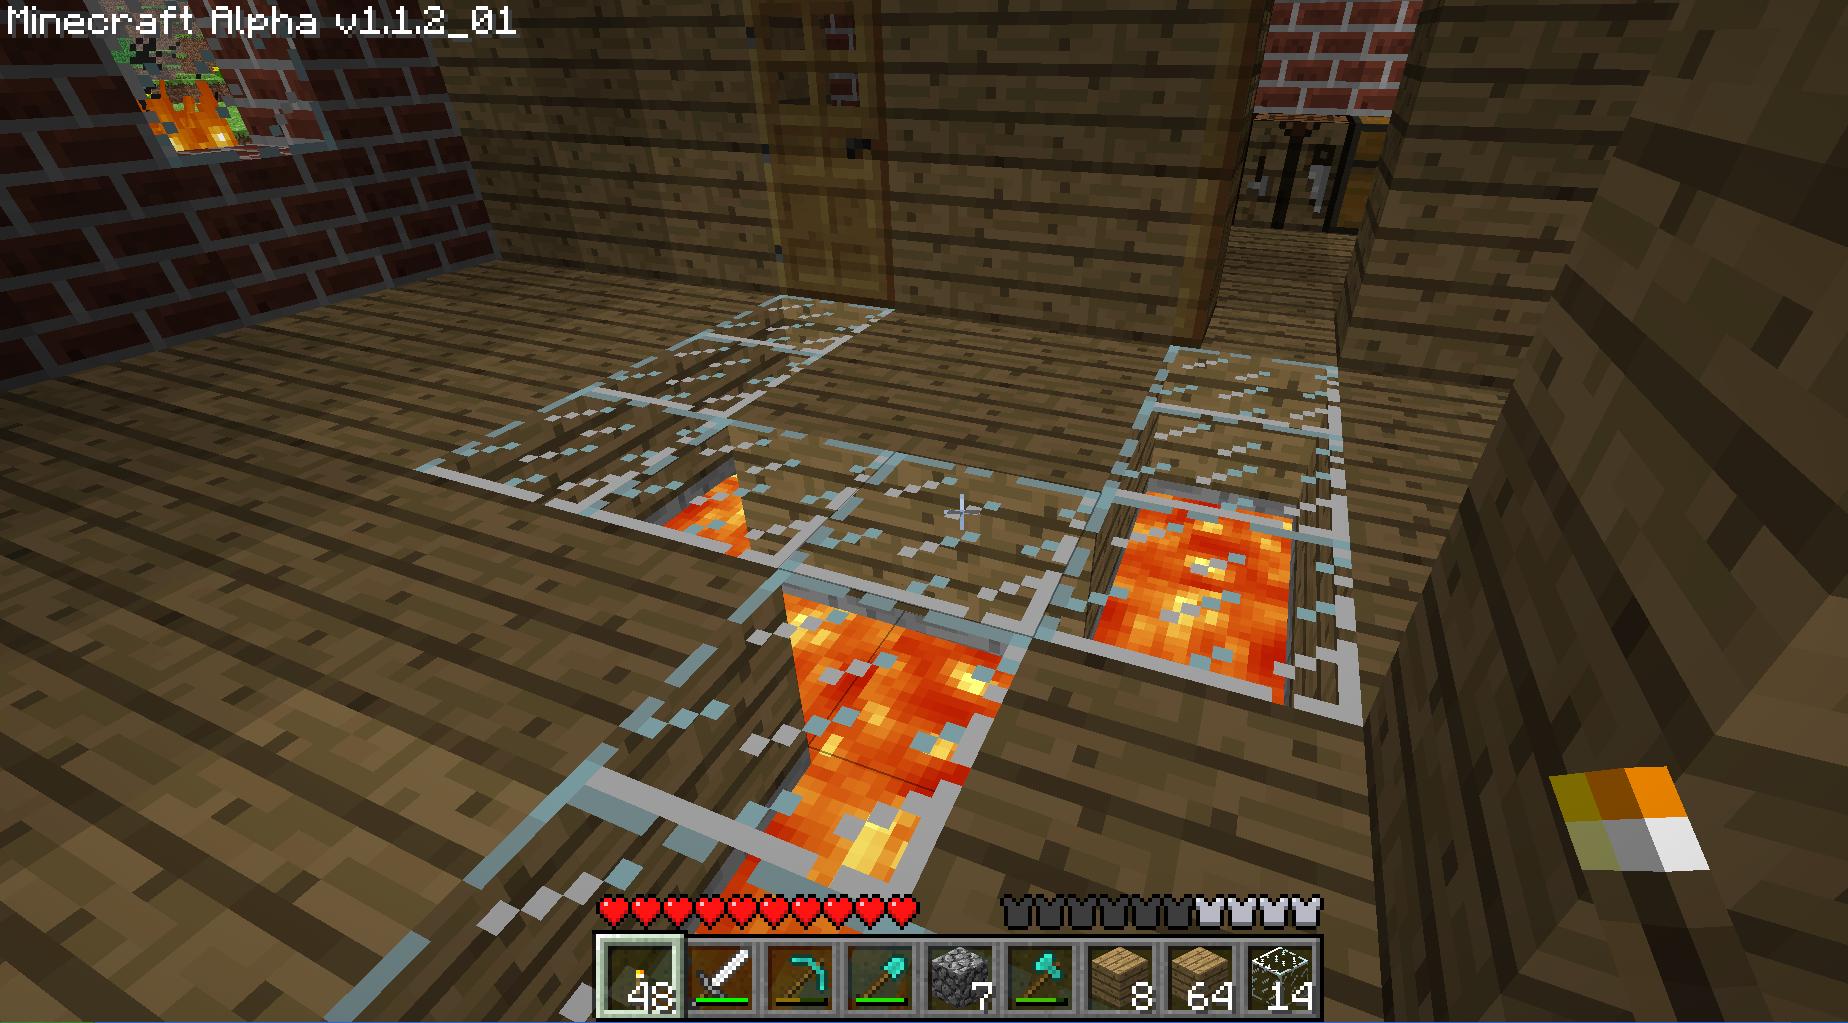 Wooden house with lava image - Minecraft - Mod DB